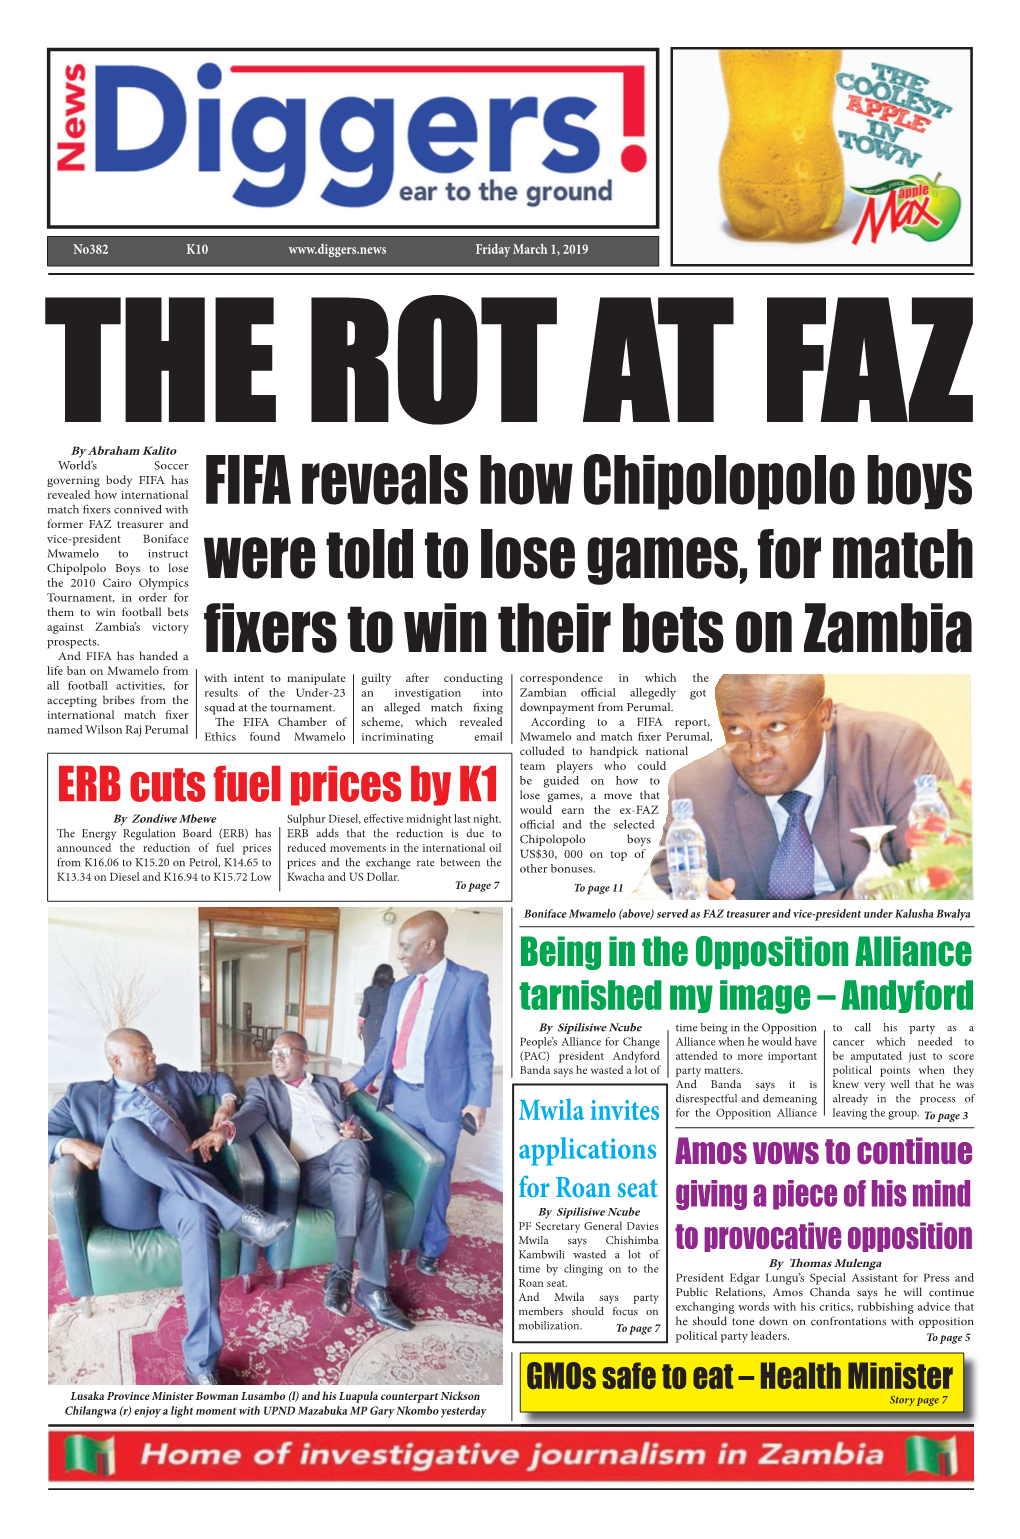 FIFA Reveals How Chipolopolo Boys Were Told to Lose Games, for Match